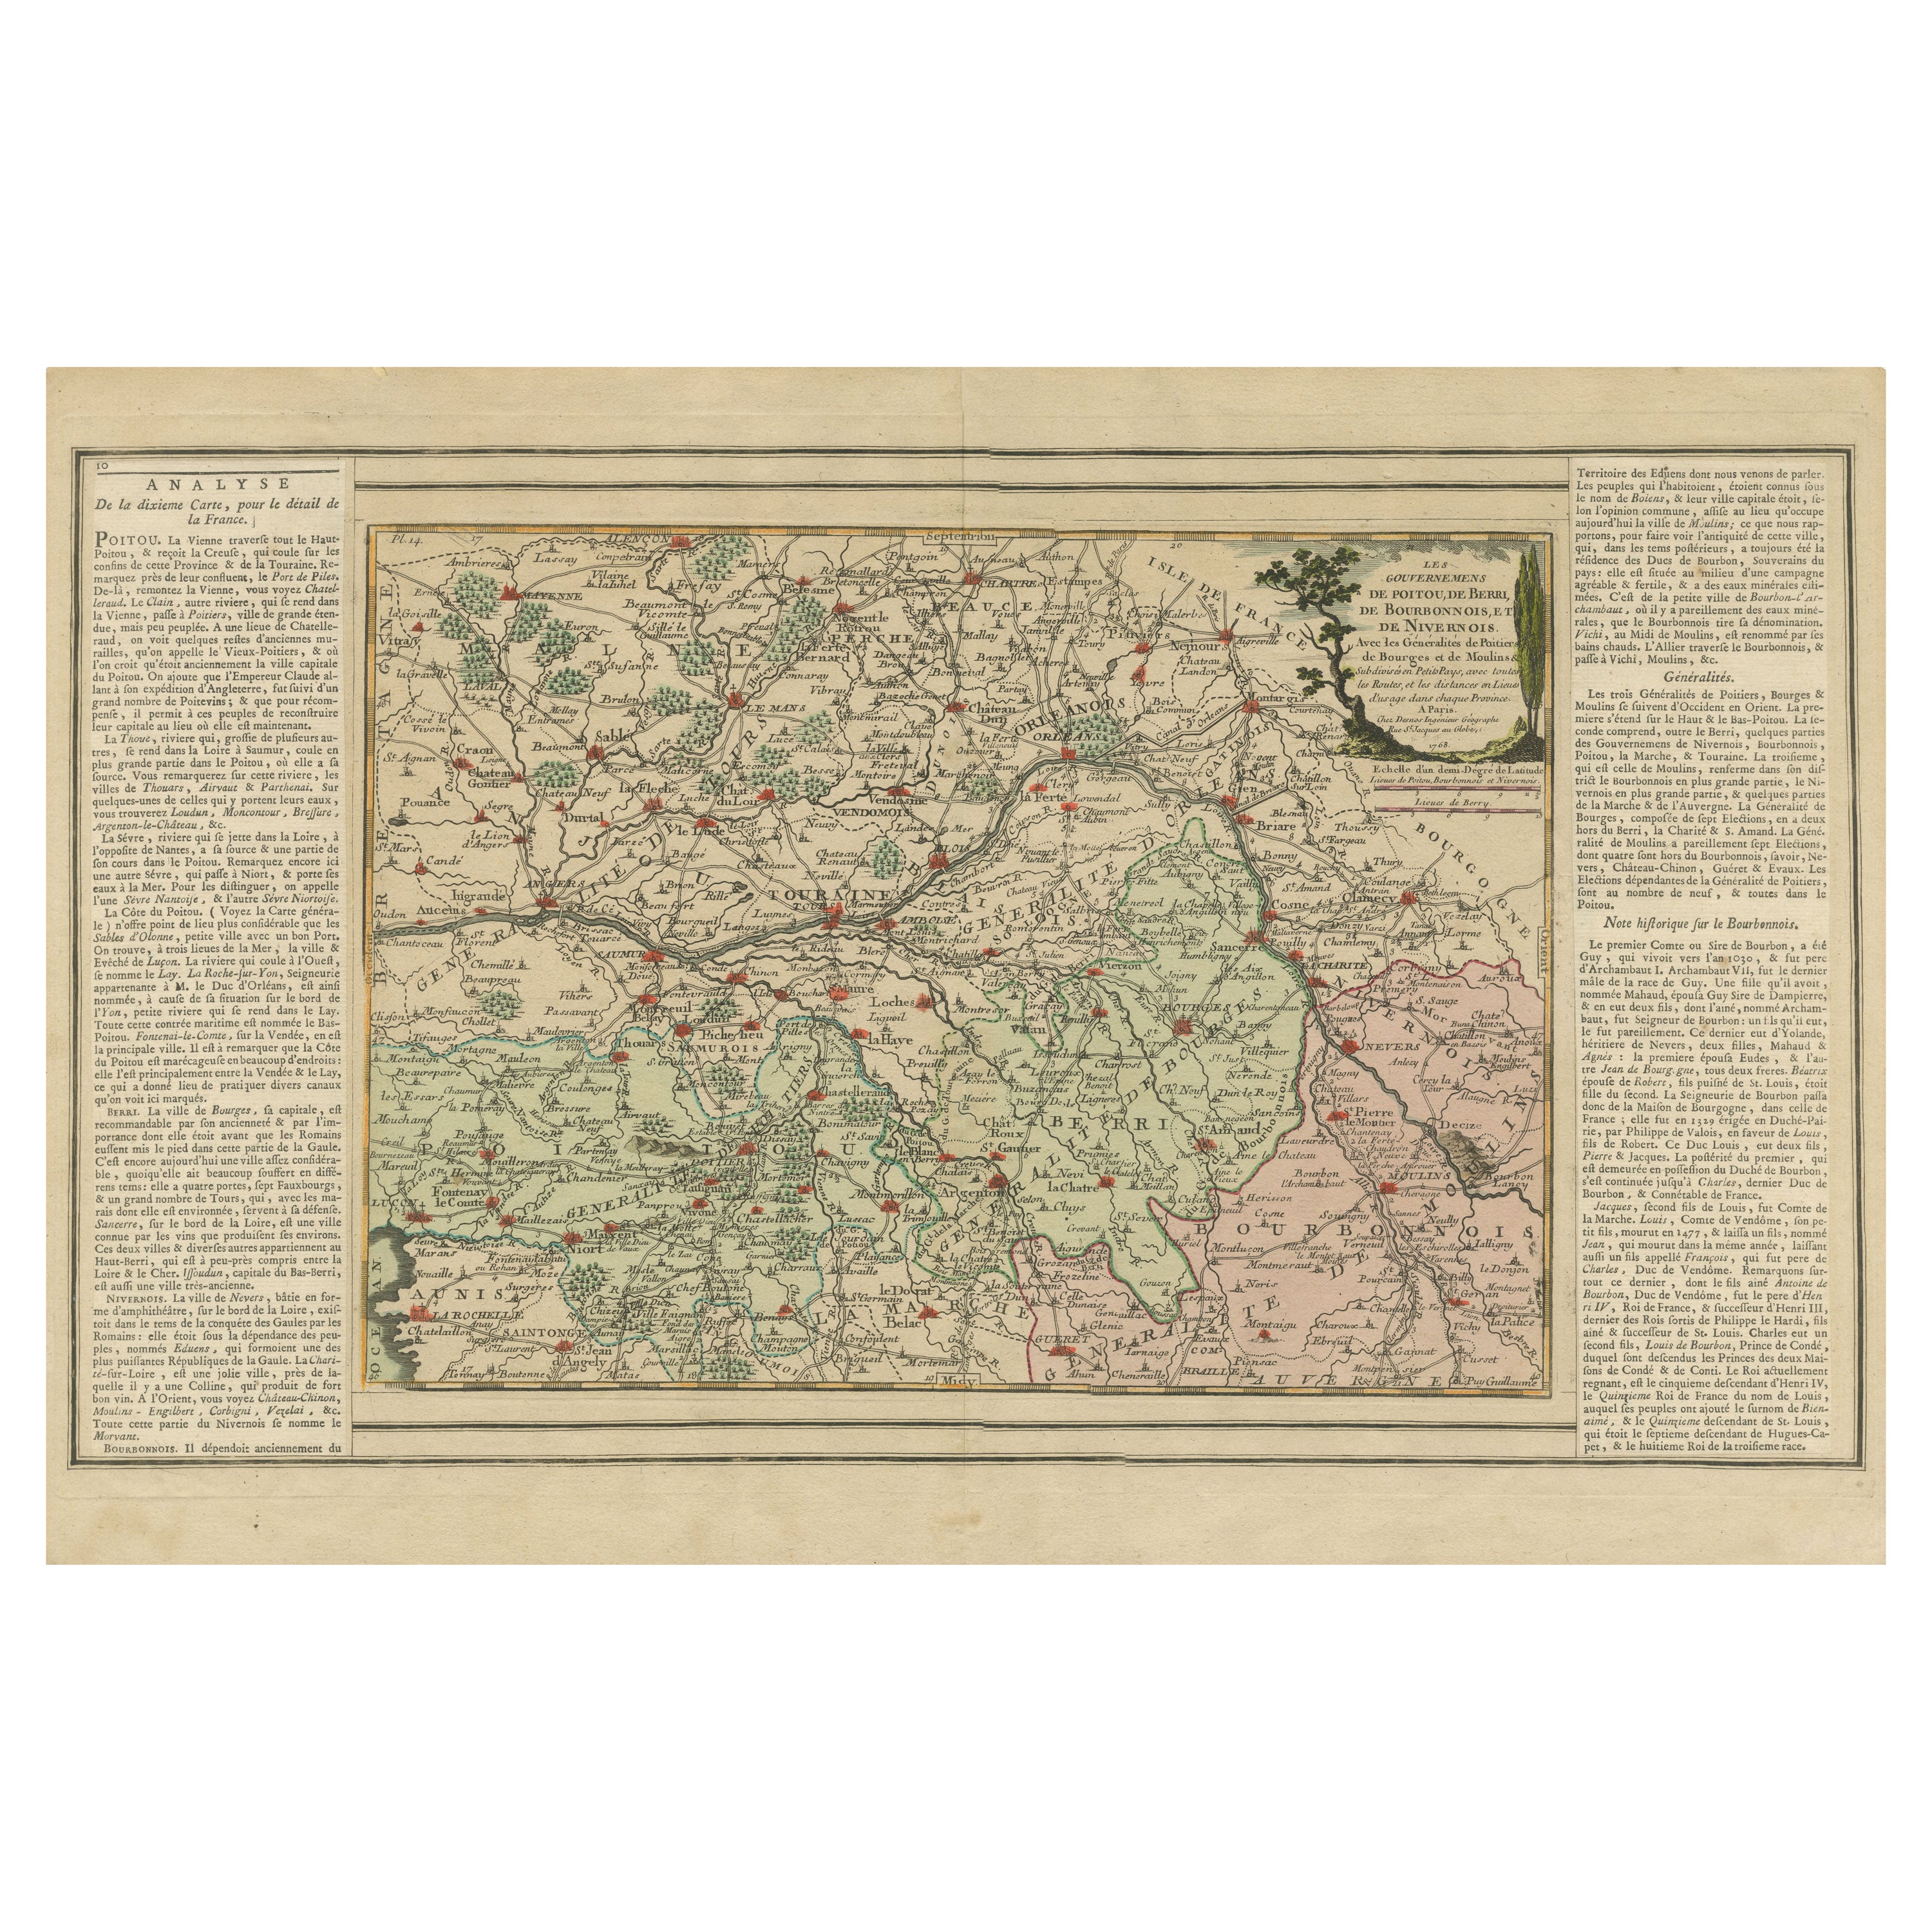 Old Map of Part of France: Poitou, Berry, Bourbonnais, and Nivernais in 1768